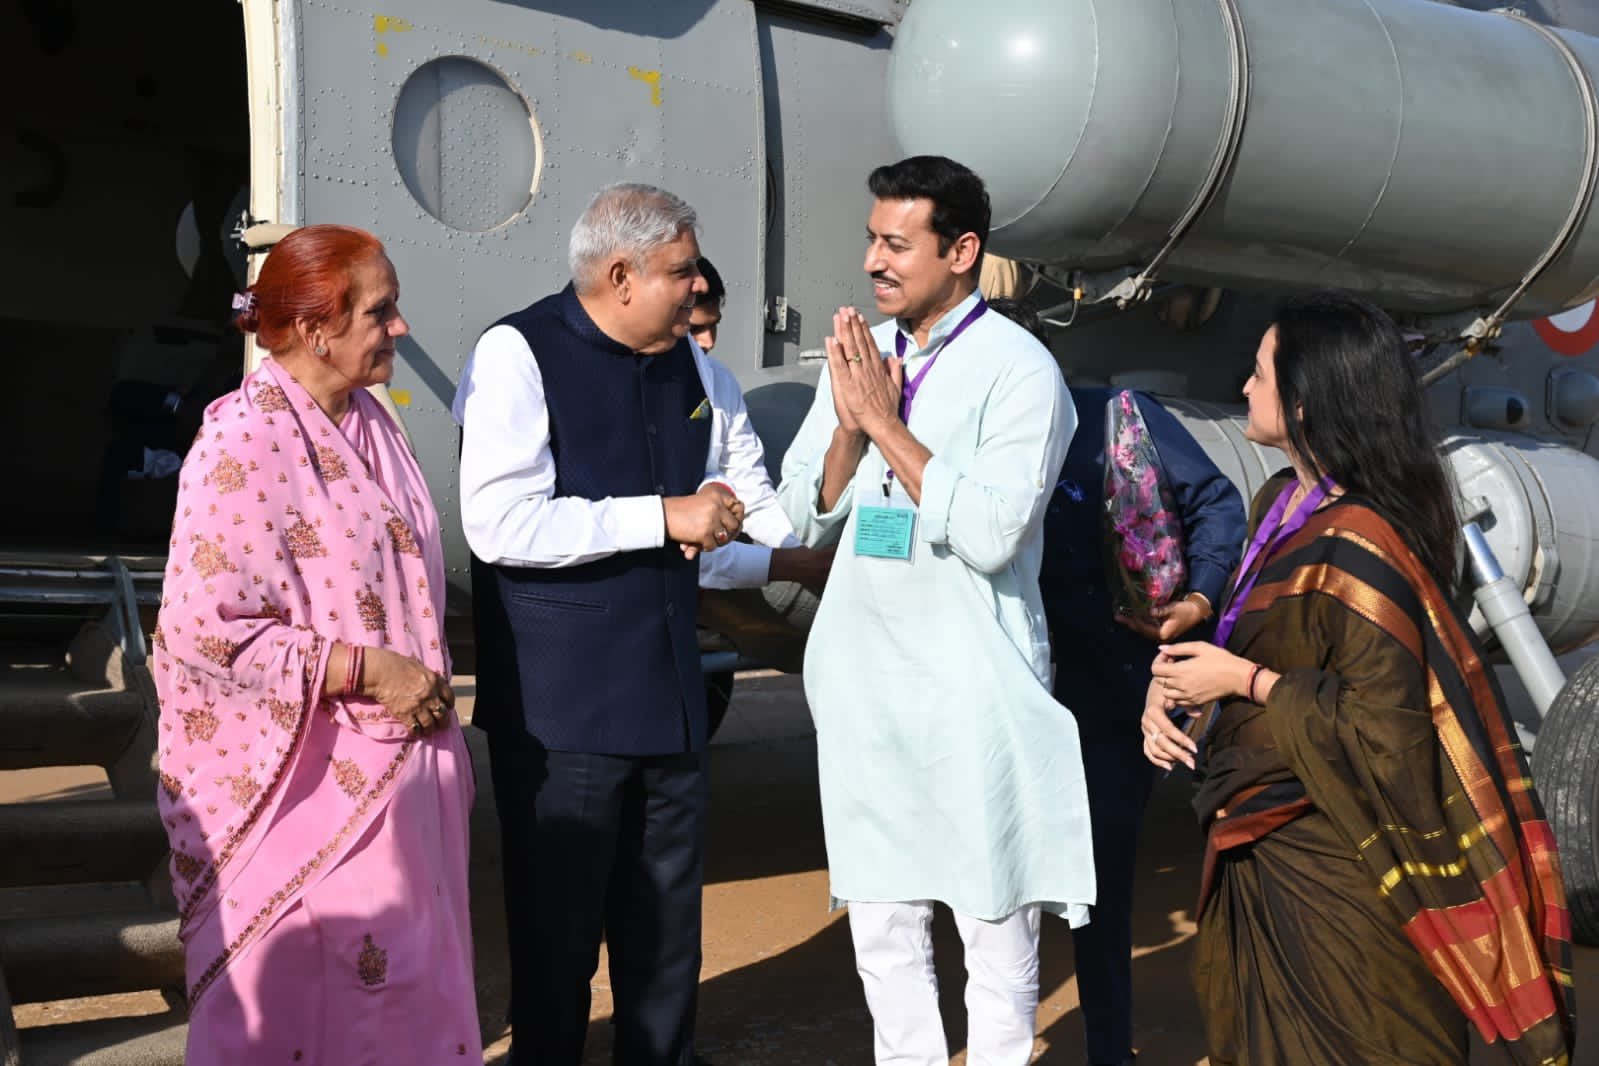 The Vice-President, Shri Jagdeep Dhankhar & Dr Sudesh Dhankhar being welcomed by Col. Rajyavardhan Rathore, Member of Parliament and other dignitaries on their arrival in Shahpura, Rajasthan on October 6, 2023.